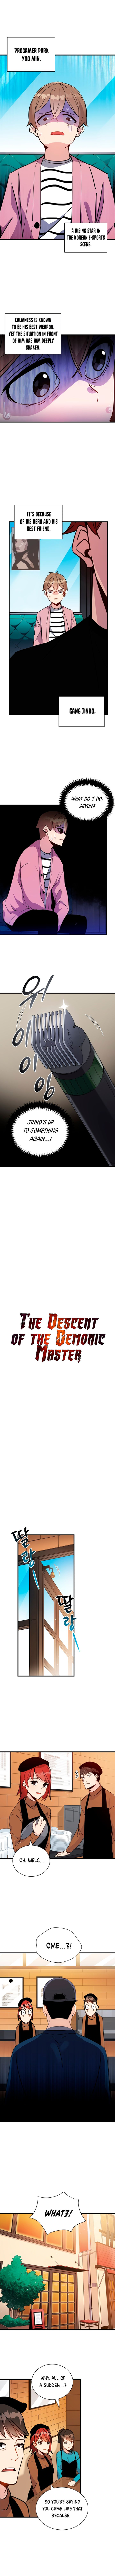 the_descent_of_the_demonic_master_36_1